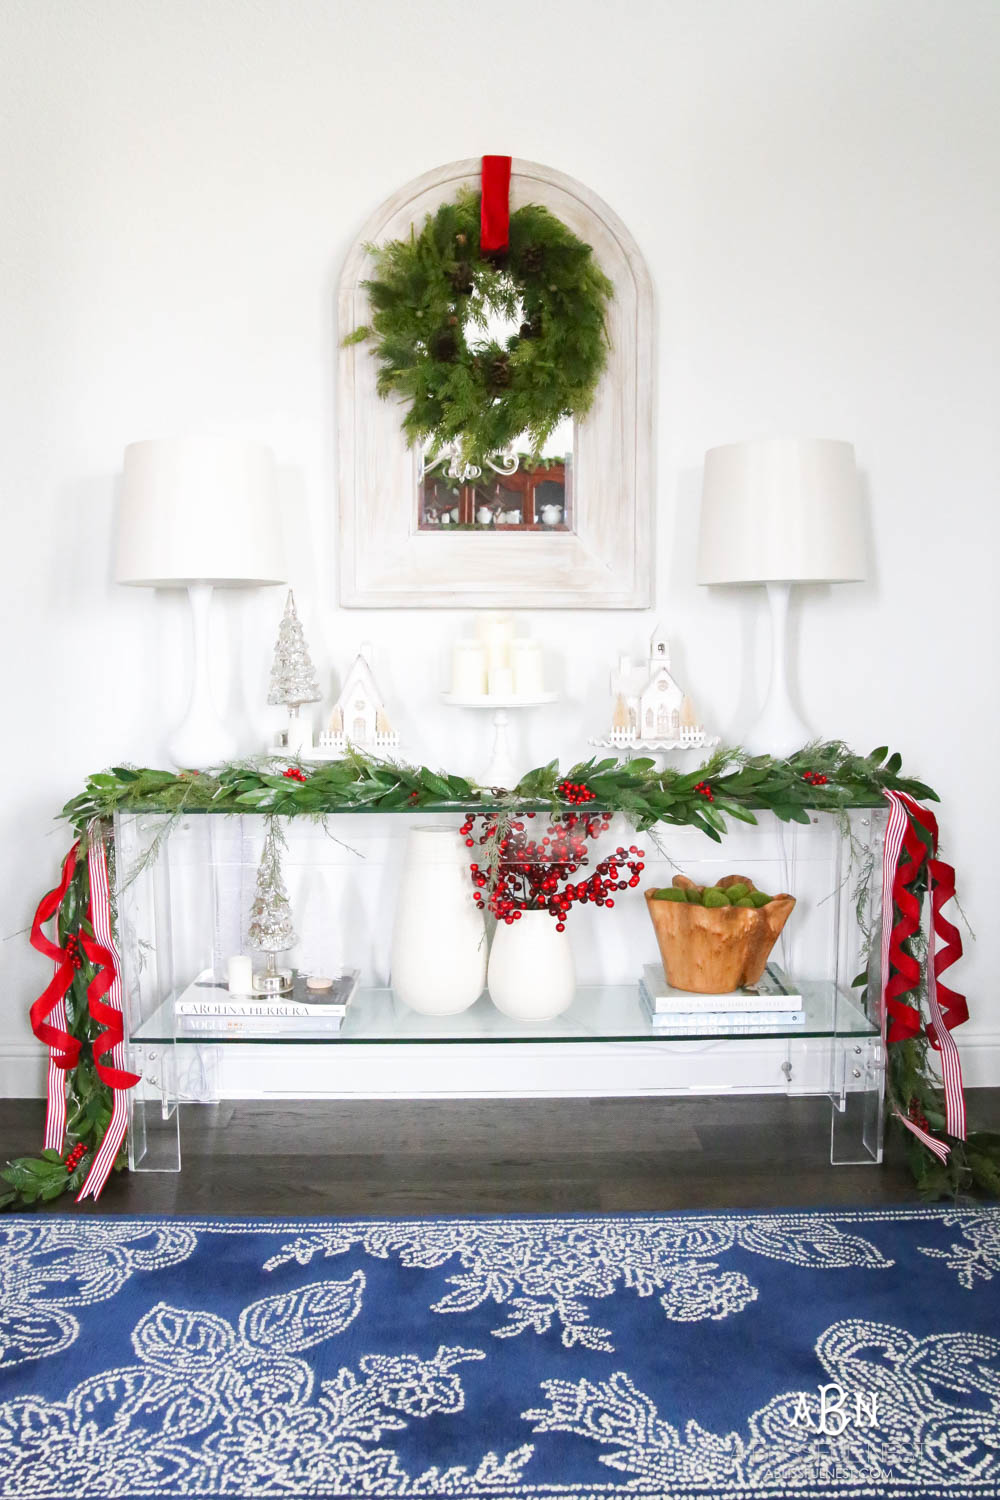 Dress up the entry with classic Christmas décor like a beautiful garland and red and white ribbon. Layered garland creates a fuller look. Add in berries to a vase. Create a festive holiday look in this narrow entryway space. #christmasentryway #christmasentry #christmasentrydecor #christmasentrywayideas #christmashometour